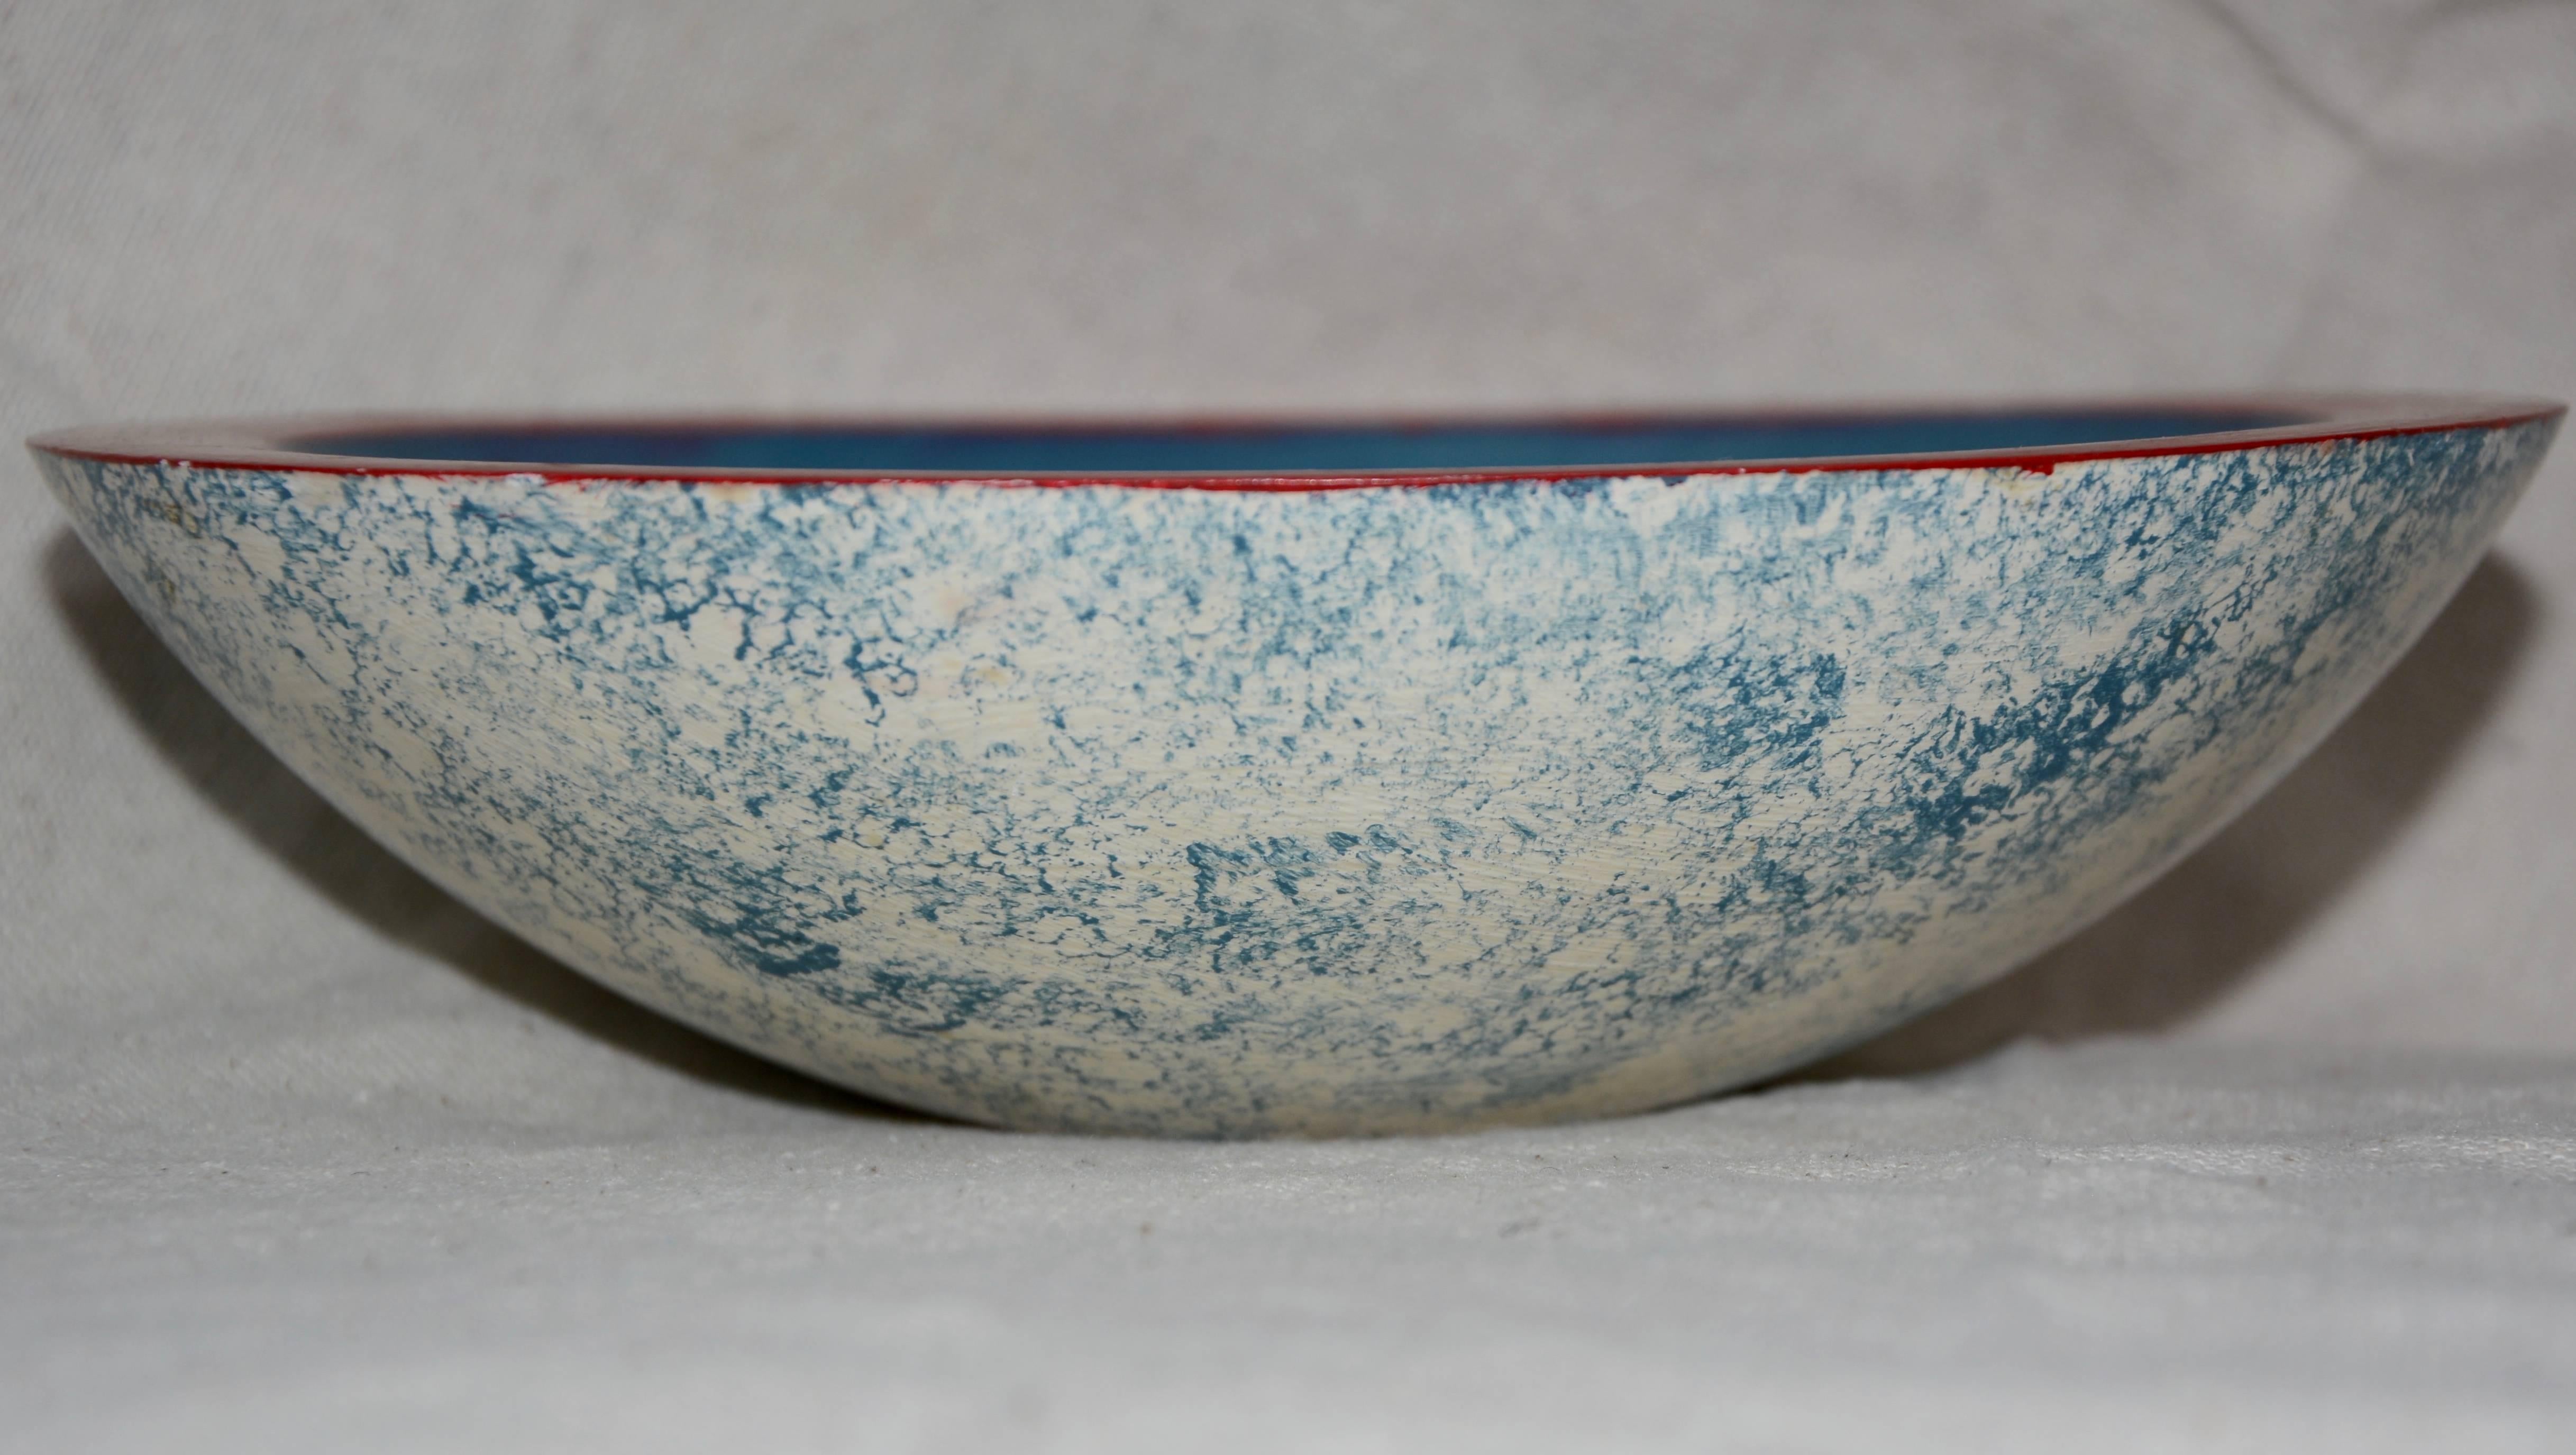 This is a unique wooden hand painted bowl. This hand painted wooden bowl features a red rim with a white chicken on a blue background. The exterior of the bowl has a blue and white sponged finish. The bowl is marked to the underside with Christ